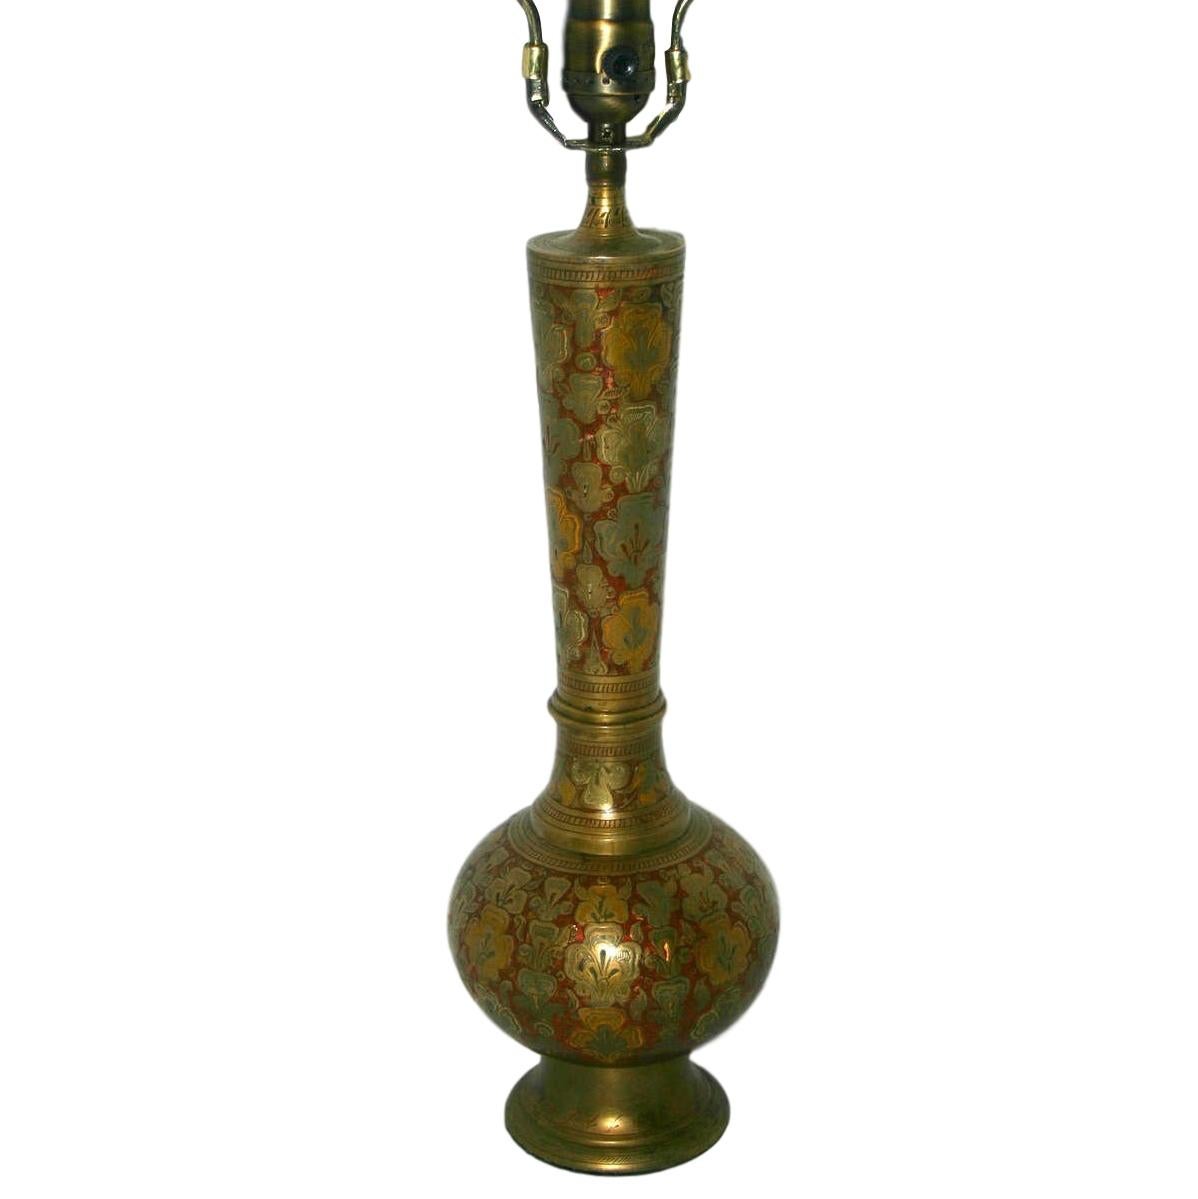 A single circa 1930's Turkish hammered and enameled brass table lamp with foliage and floral motif on body.

Measurements:
Height of body: 15.5